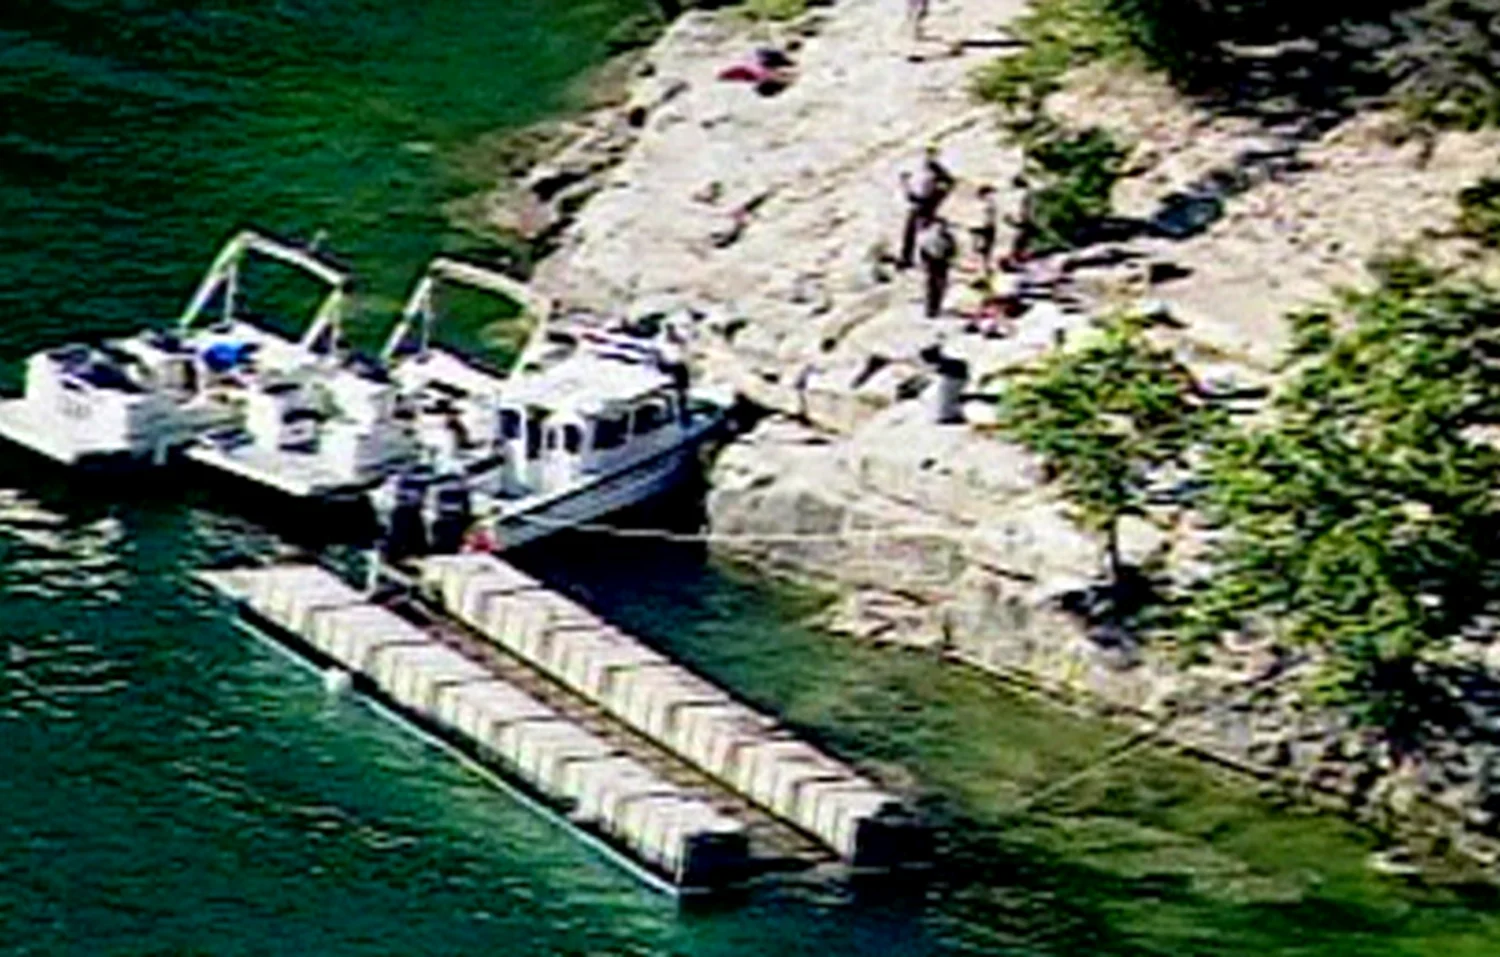 Lake Travis party boat sinks over nudity